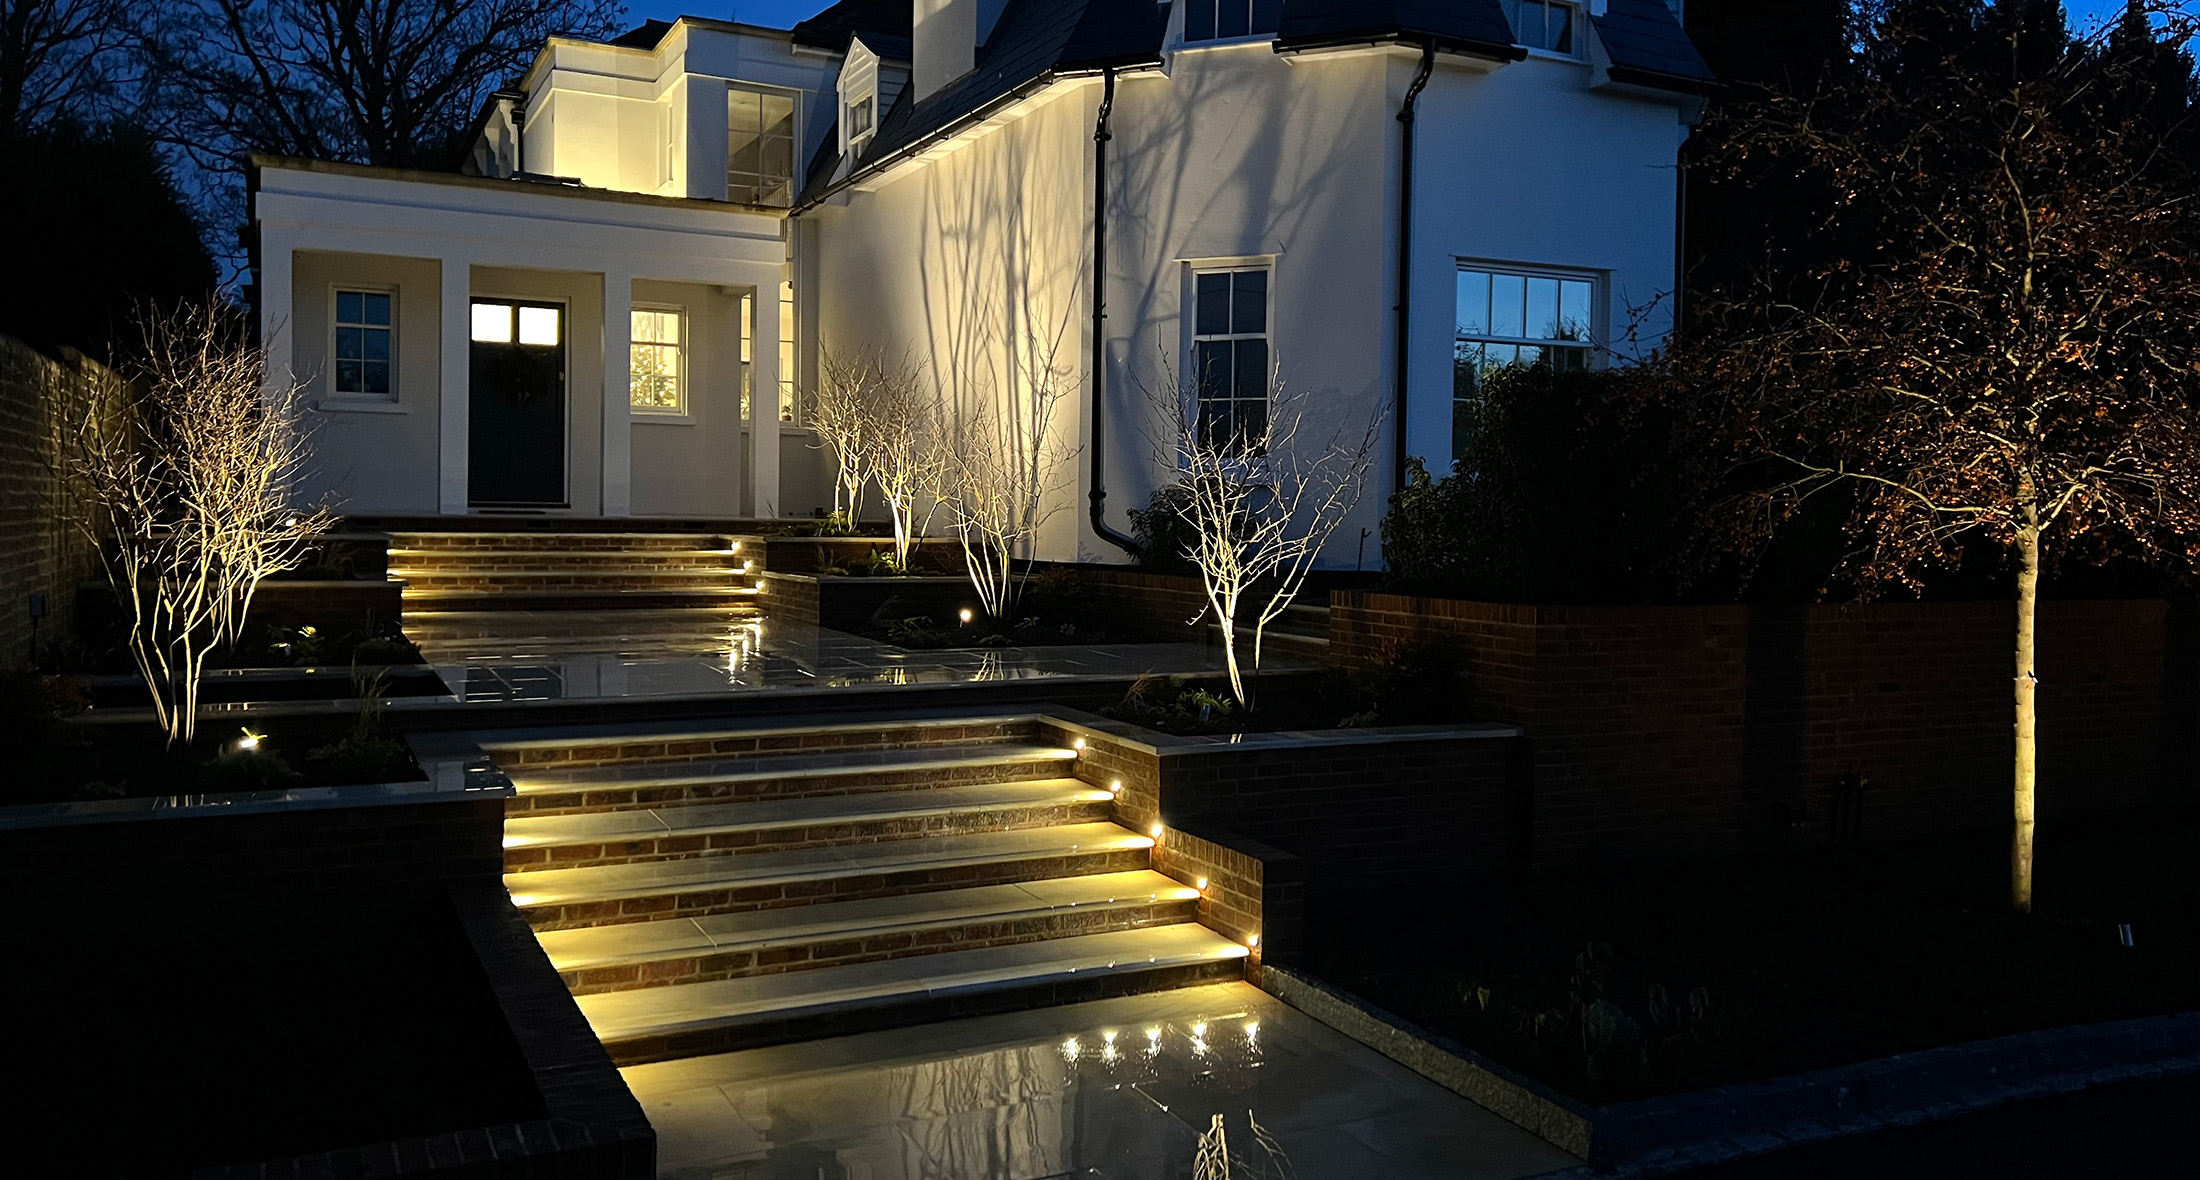 Slate Grey garden lighting downlighters on a wooden clad wall in a newly designed and landscaped garden in Tunbridge Wells, Kent